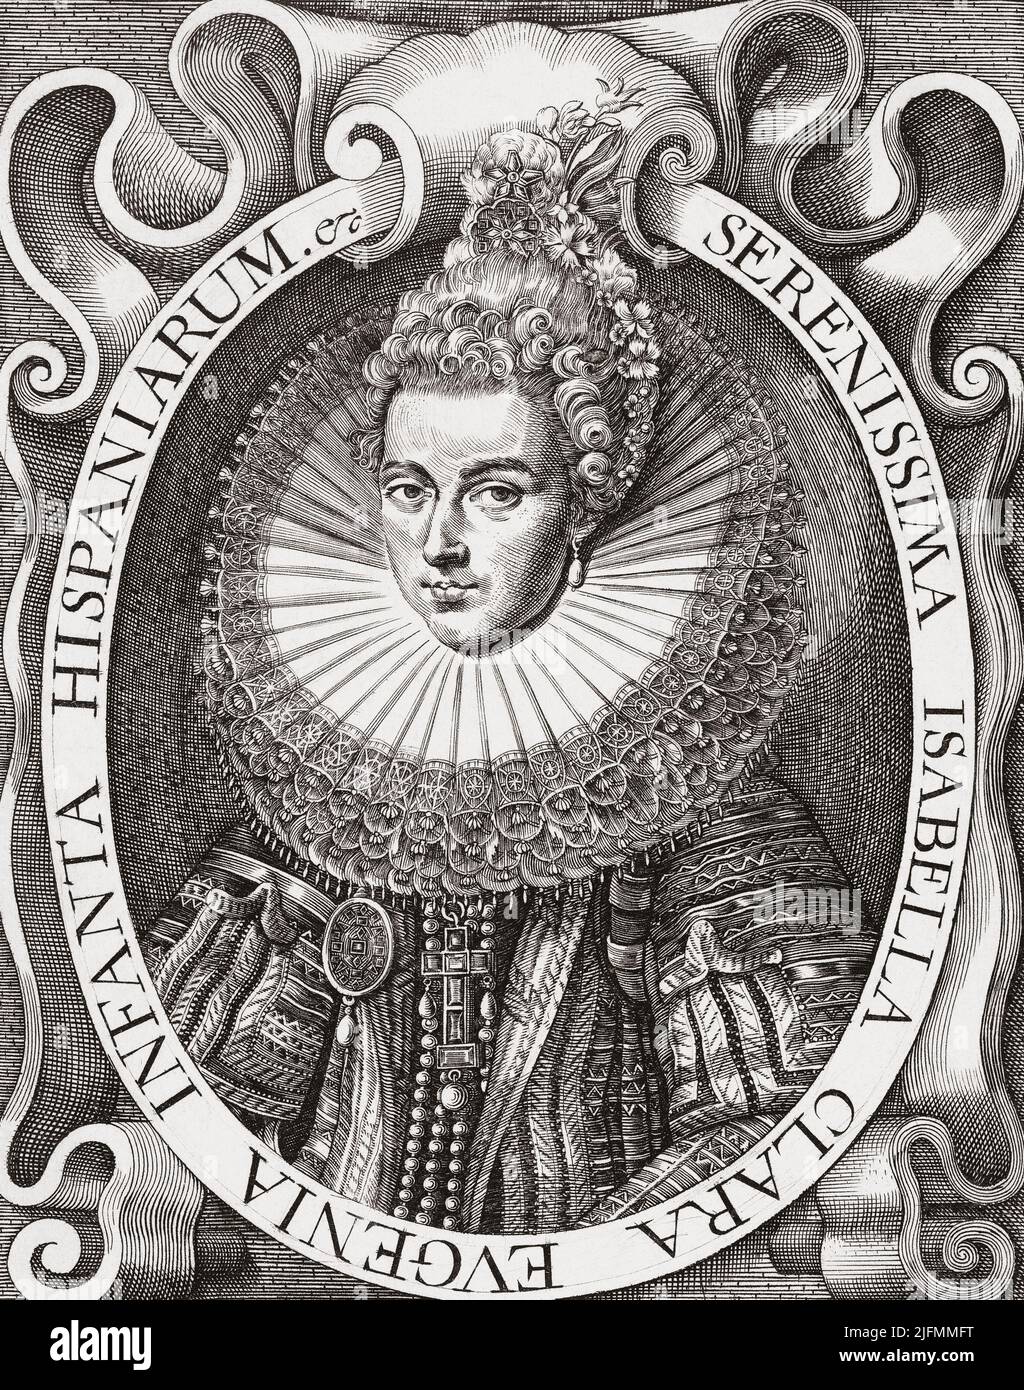 Isabella Clara Eugenia, 1566 - 1633. Daughter of Philip II of Spain and Elisabeth of Valois. With her husband Albert VII, Archduke of Austria she was sovereign of the Spanish Netherlands and the north of modern France.  After a work by Renold Elstrack. Stock Photo